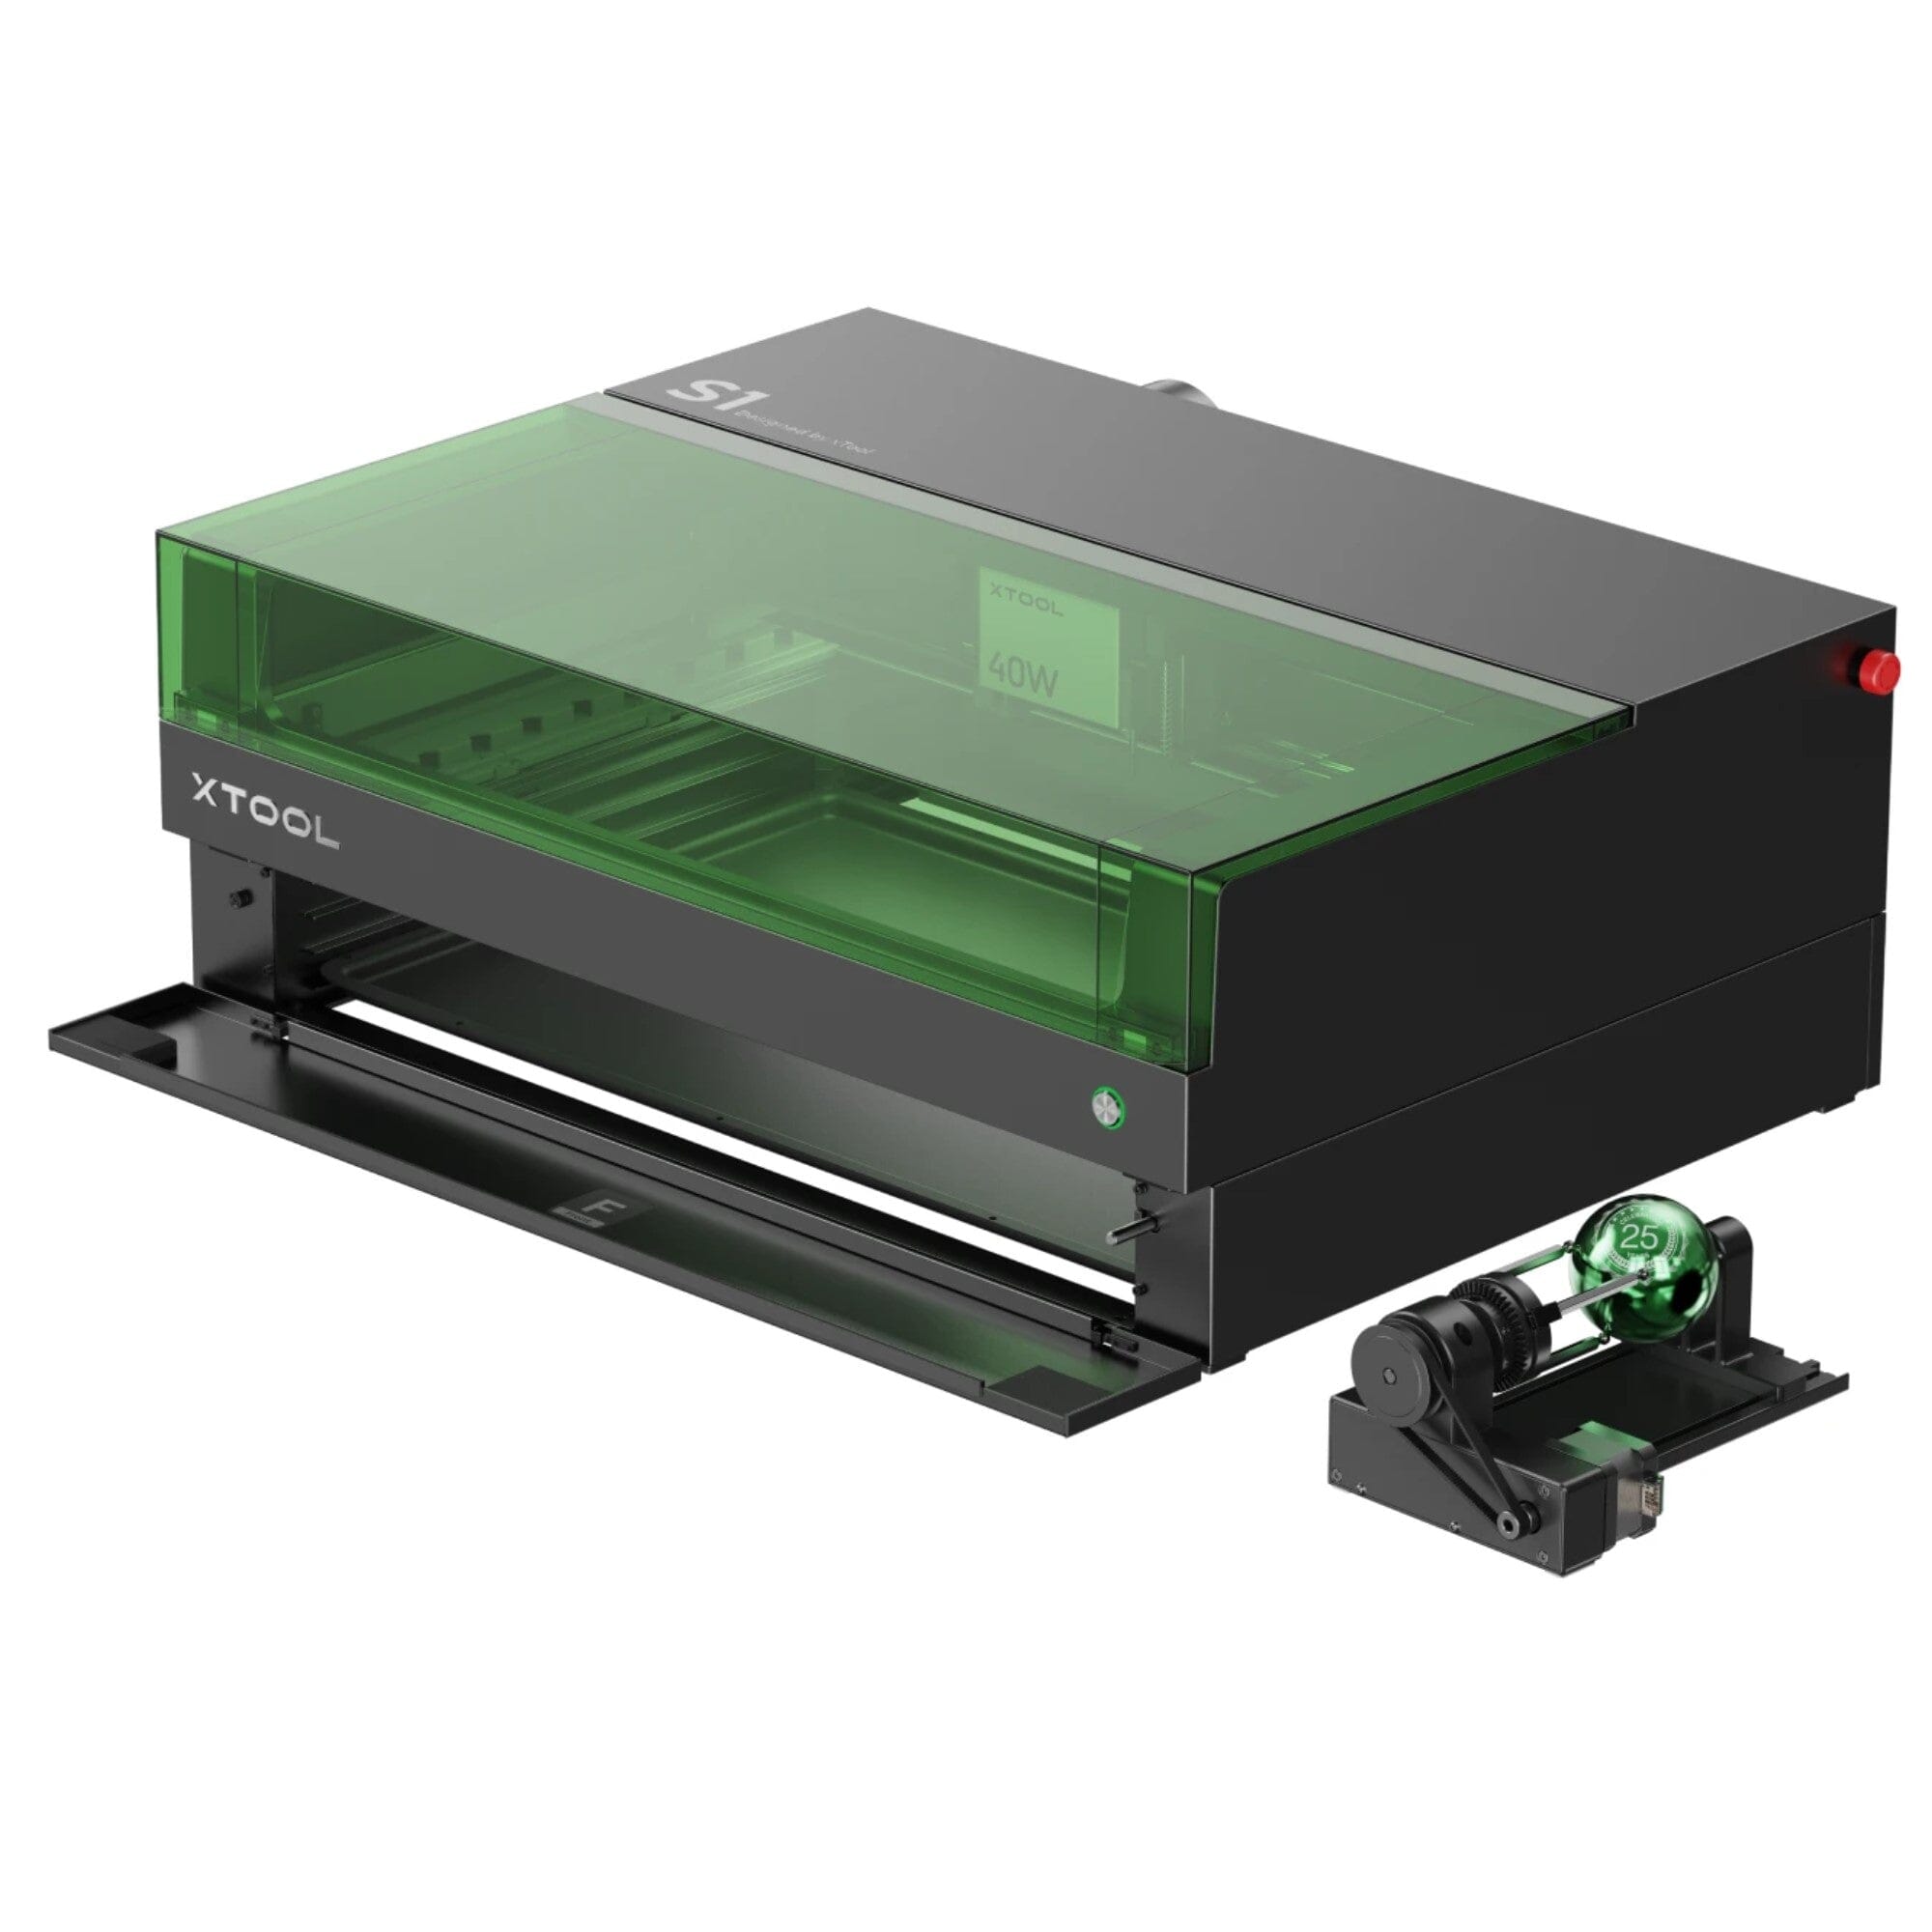 The next generation of diode lasers-xTool S1 40 watt 